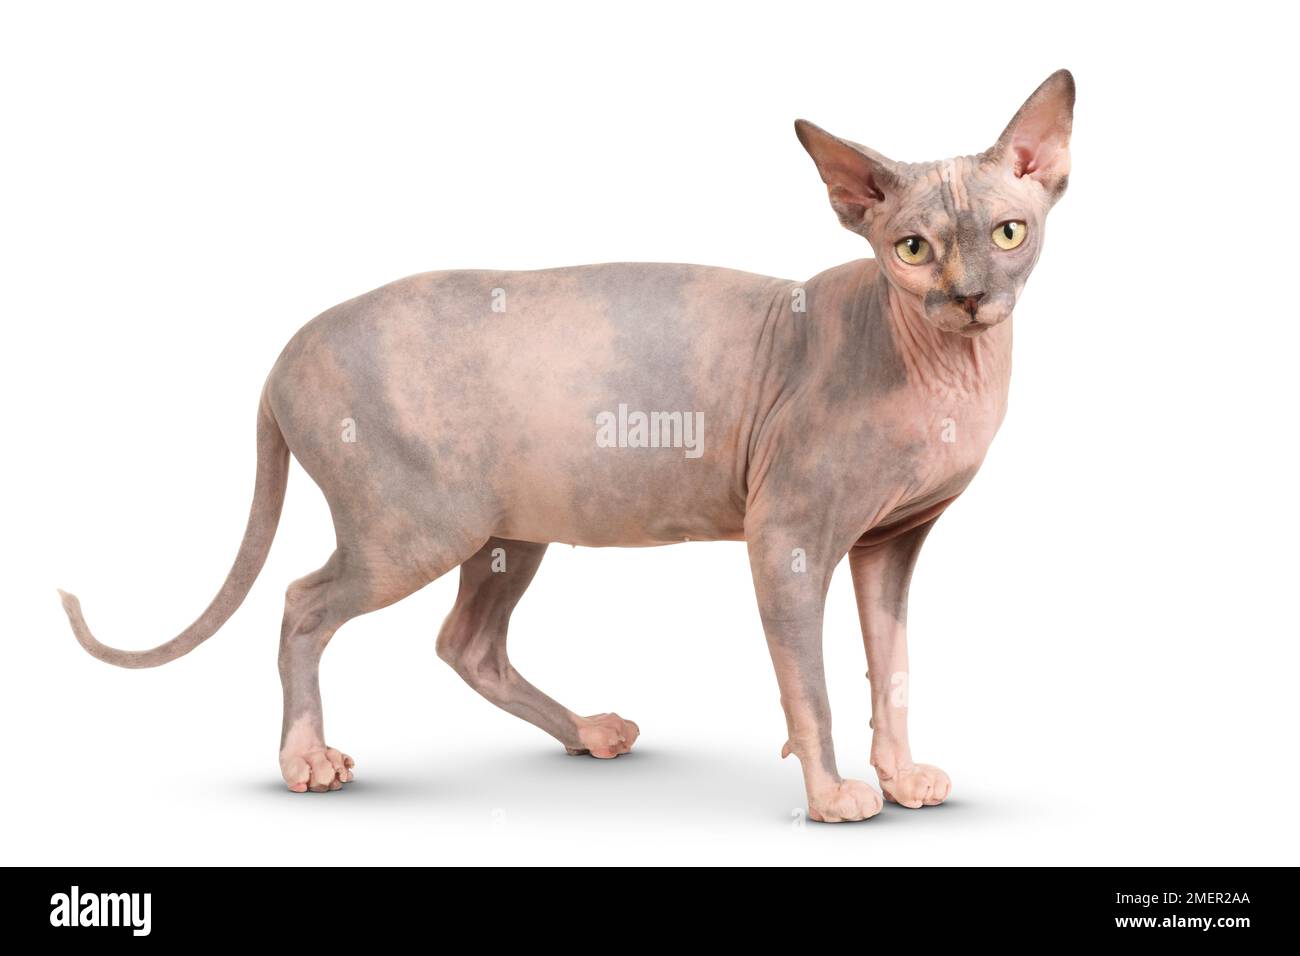 Purebred adult Sphynx cat with yellow eyes, standing, looking at camera, side view Stock Photo